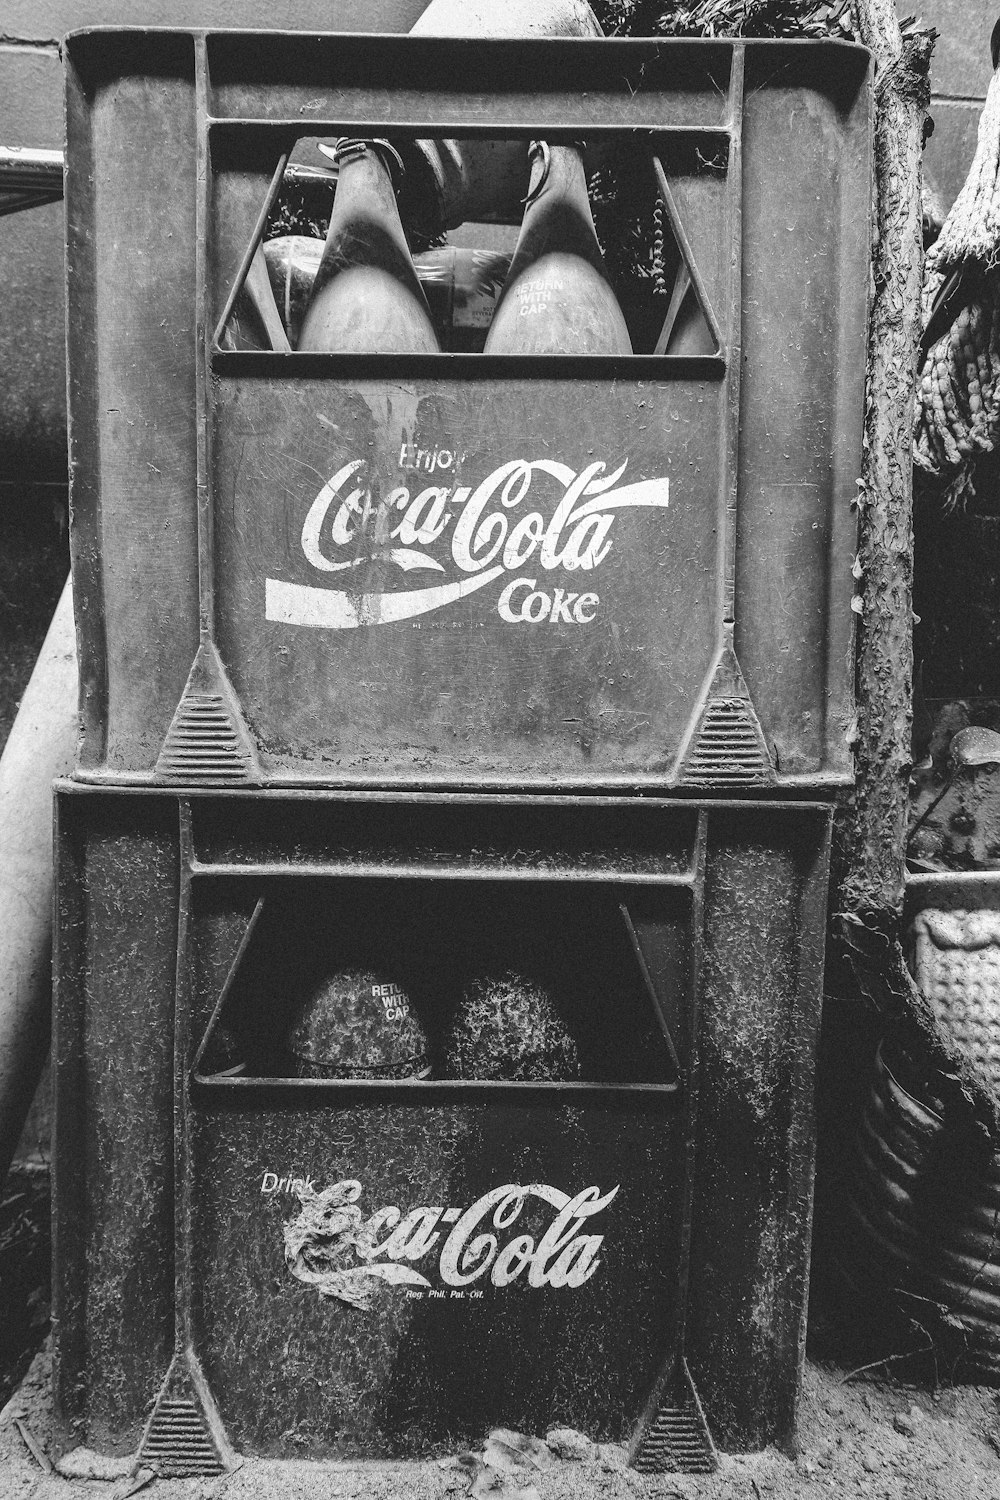 grayscale photo of staked Coca-cola crates